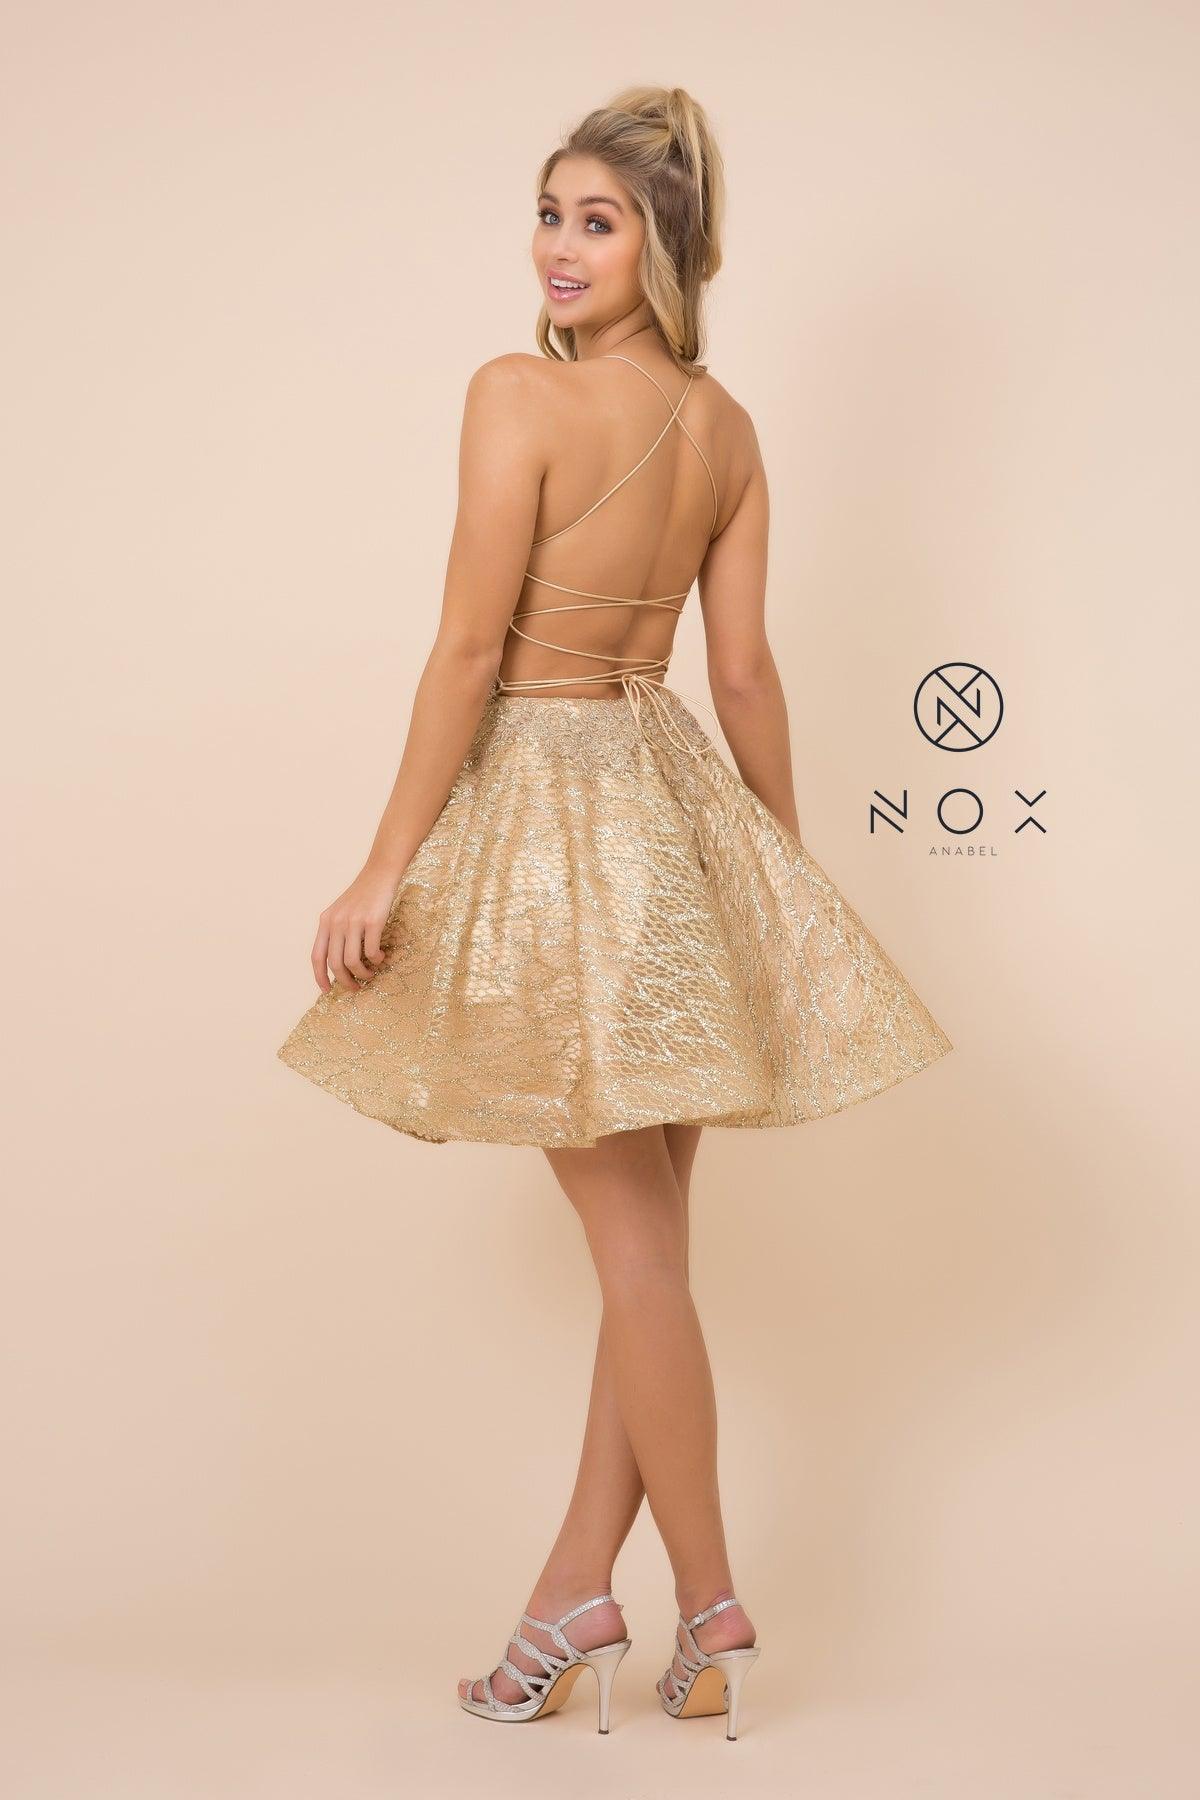 Short Sleeveless Prom Dress Homecoming - The Dress Outlet Nox Anabel